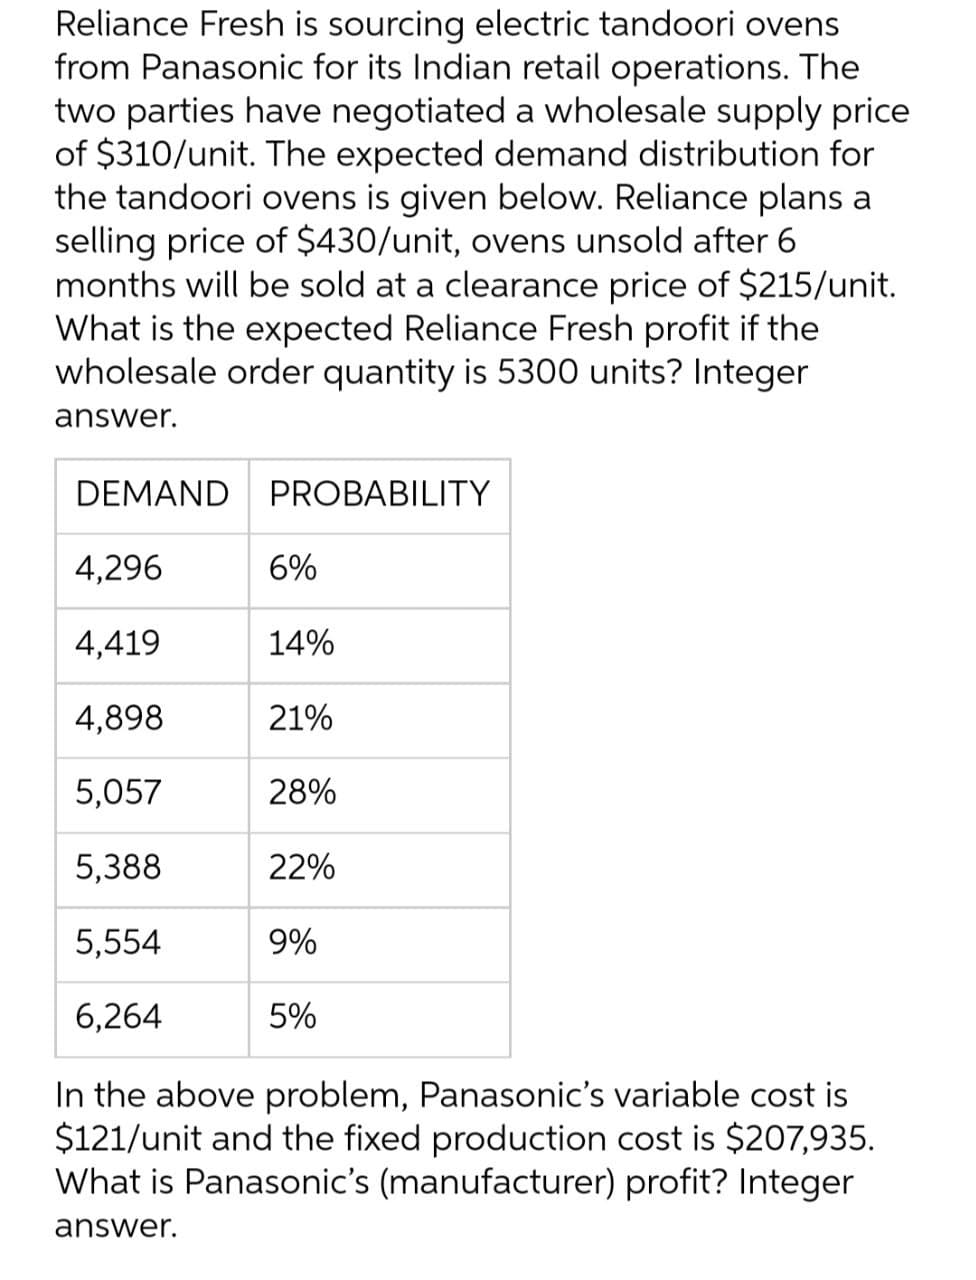 Reliance Fresh is sourcing electric tandoori ovens
from Panasonic for its Indian retail operations. The
two parties have negotiated a wholesale supply price
of $310/unit. The expected demand distribution for
the tandoori ovens is given below. Reliance plans a
selling price of $430/unit, ovens unsold after 6
months will be sold at a clearance price of $215/unit.
What is the expected Reliance Fresh profit if the
wholesale order quantity is 5300 units? Integer
answer.
DEMAND PROBABILITY
4,296
4,419
4,898
5,057
5,388
5,554
6,264
In the above problem, Panasonic's variable cost is
$121/unit and the fixed production cost is $207,935.
What is Panasonic's (manufacturer) profit? Integer
answer.
6%
14%
21%
28%
22%
9%
5%